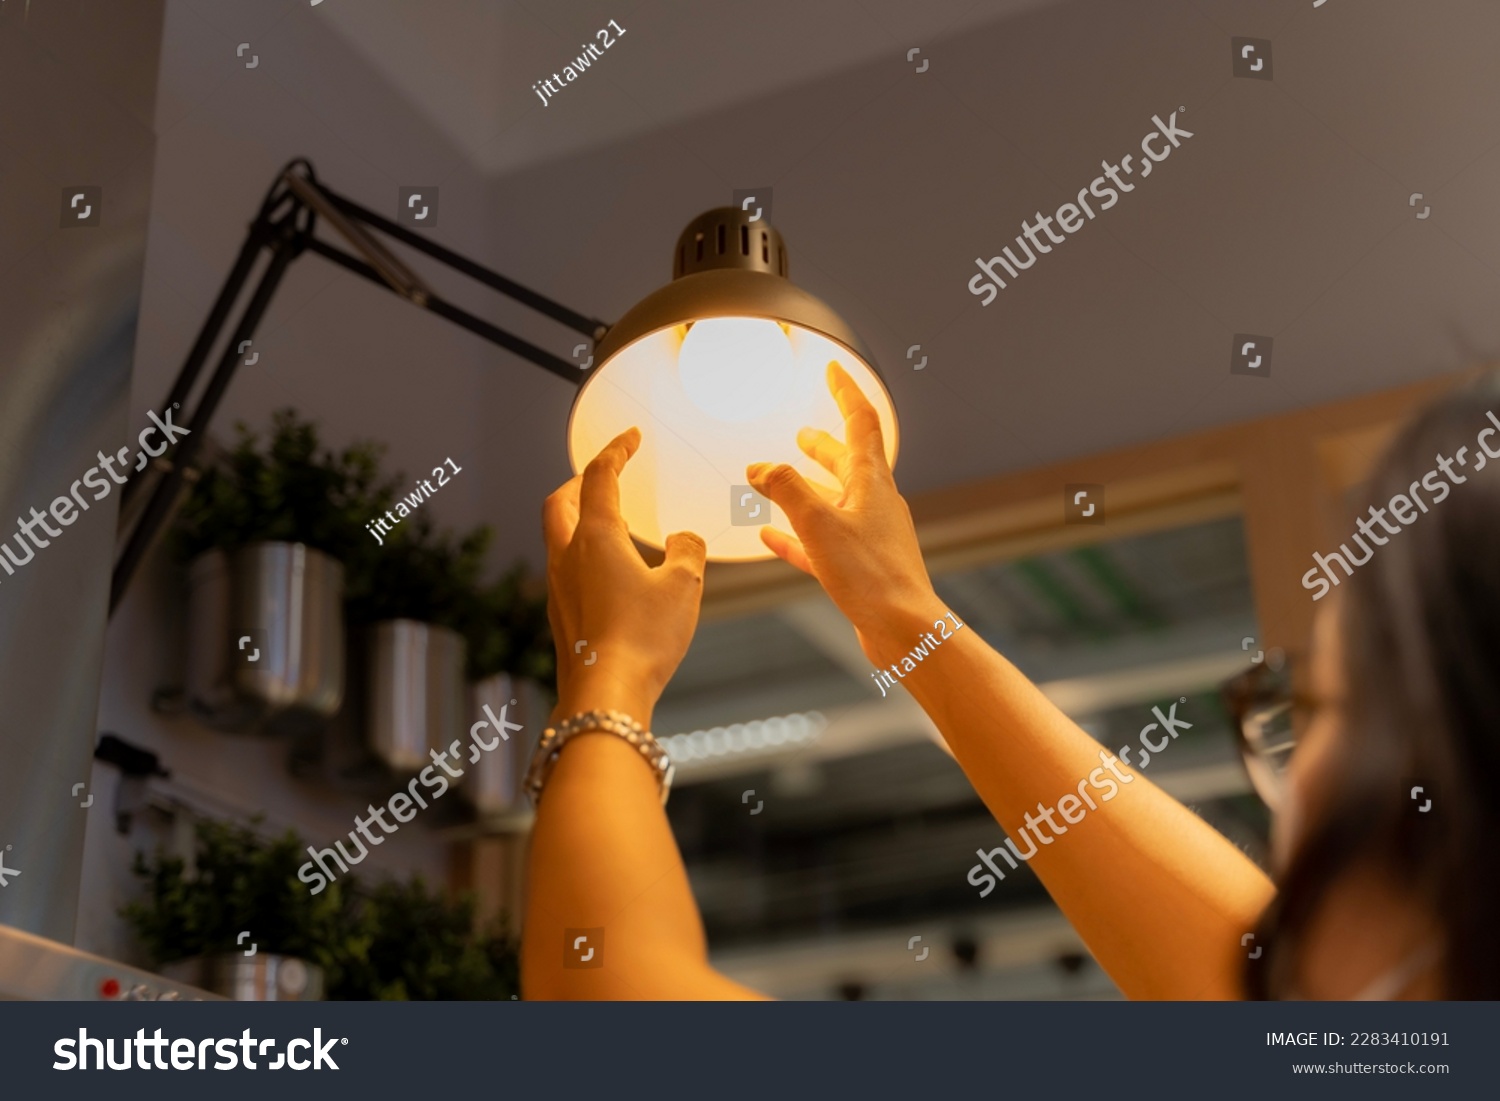 Hand woman changing with new LED lamp light bulb,Power saving concept. Reusing and recycling existing materials for future growth of business and environment sustainable.  #2283410191